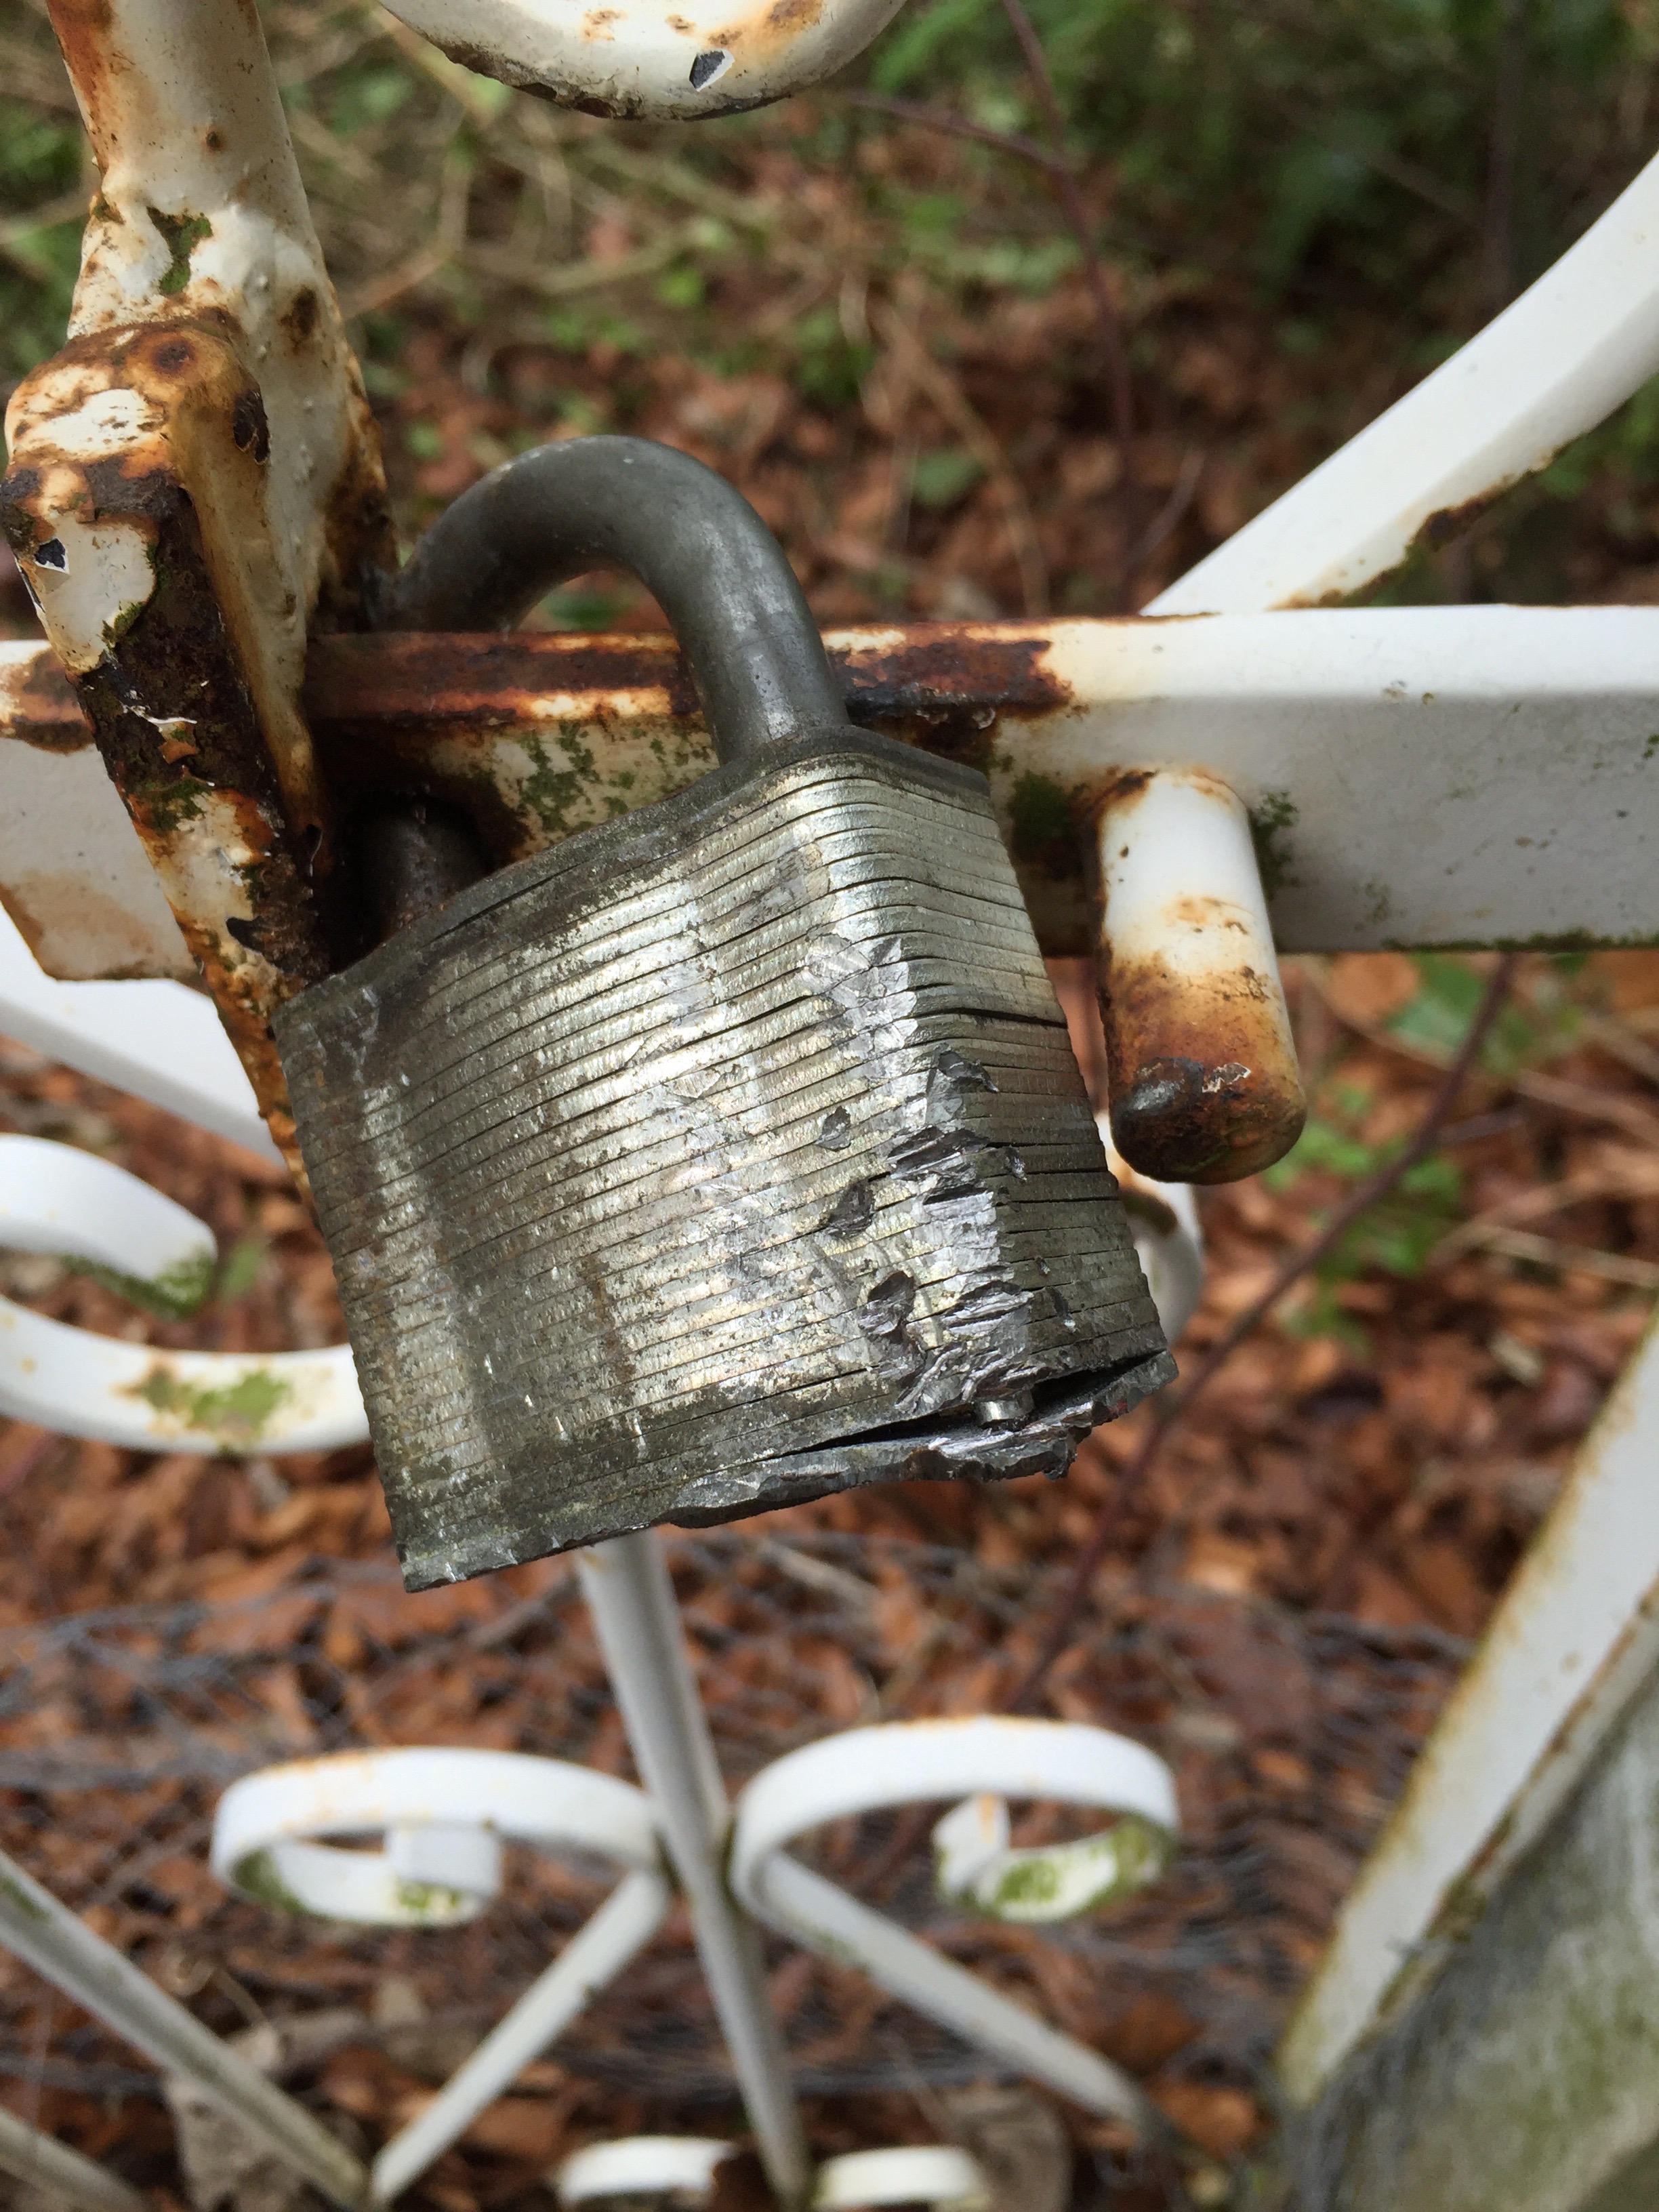 The bottom plate of the padlock revealed, lock mechanism removed